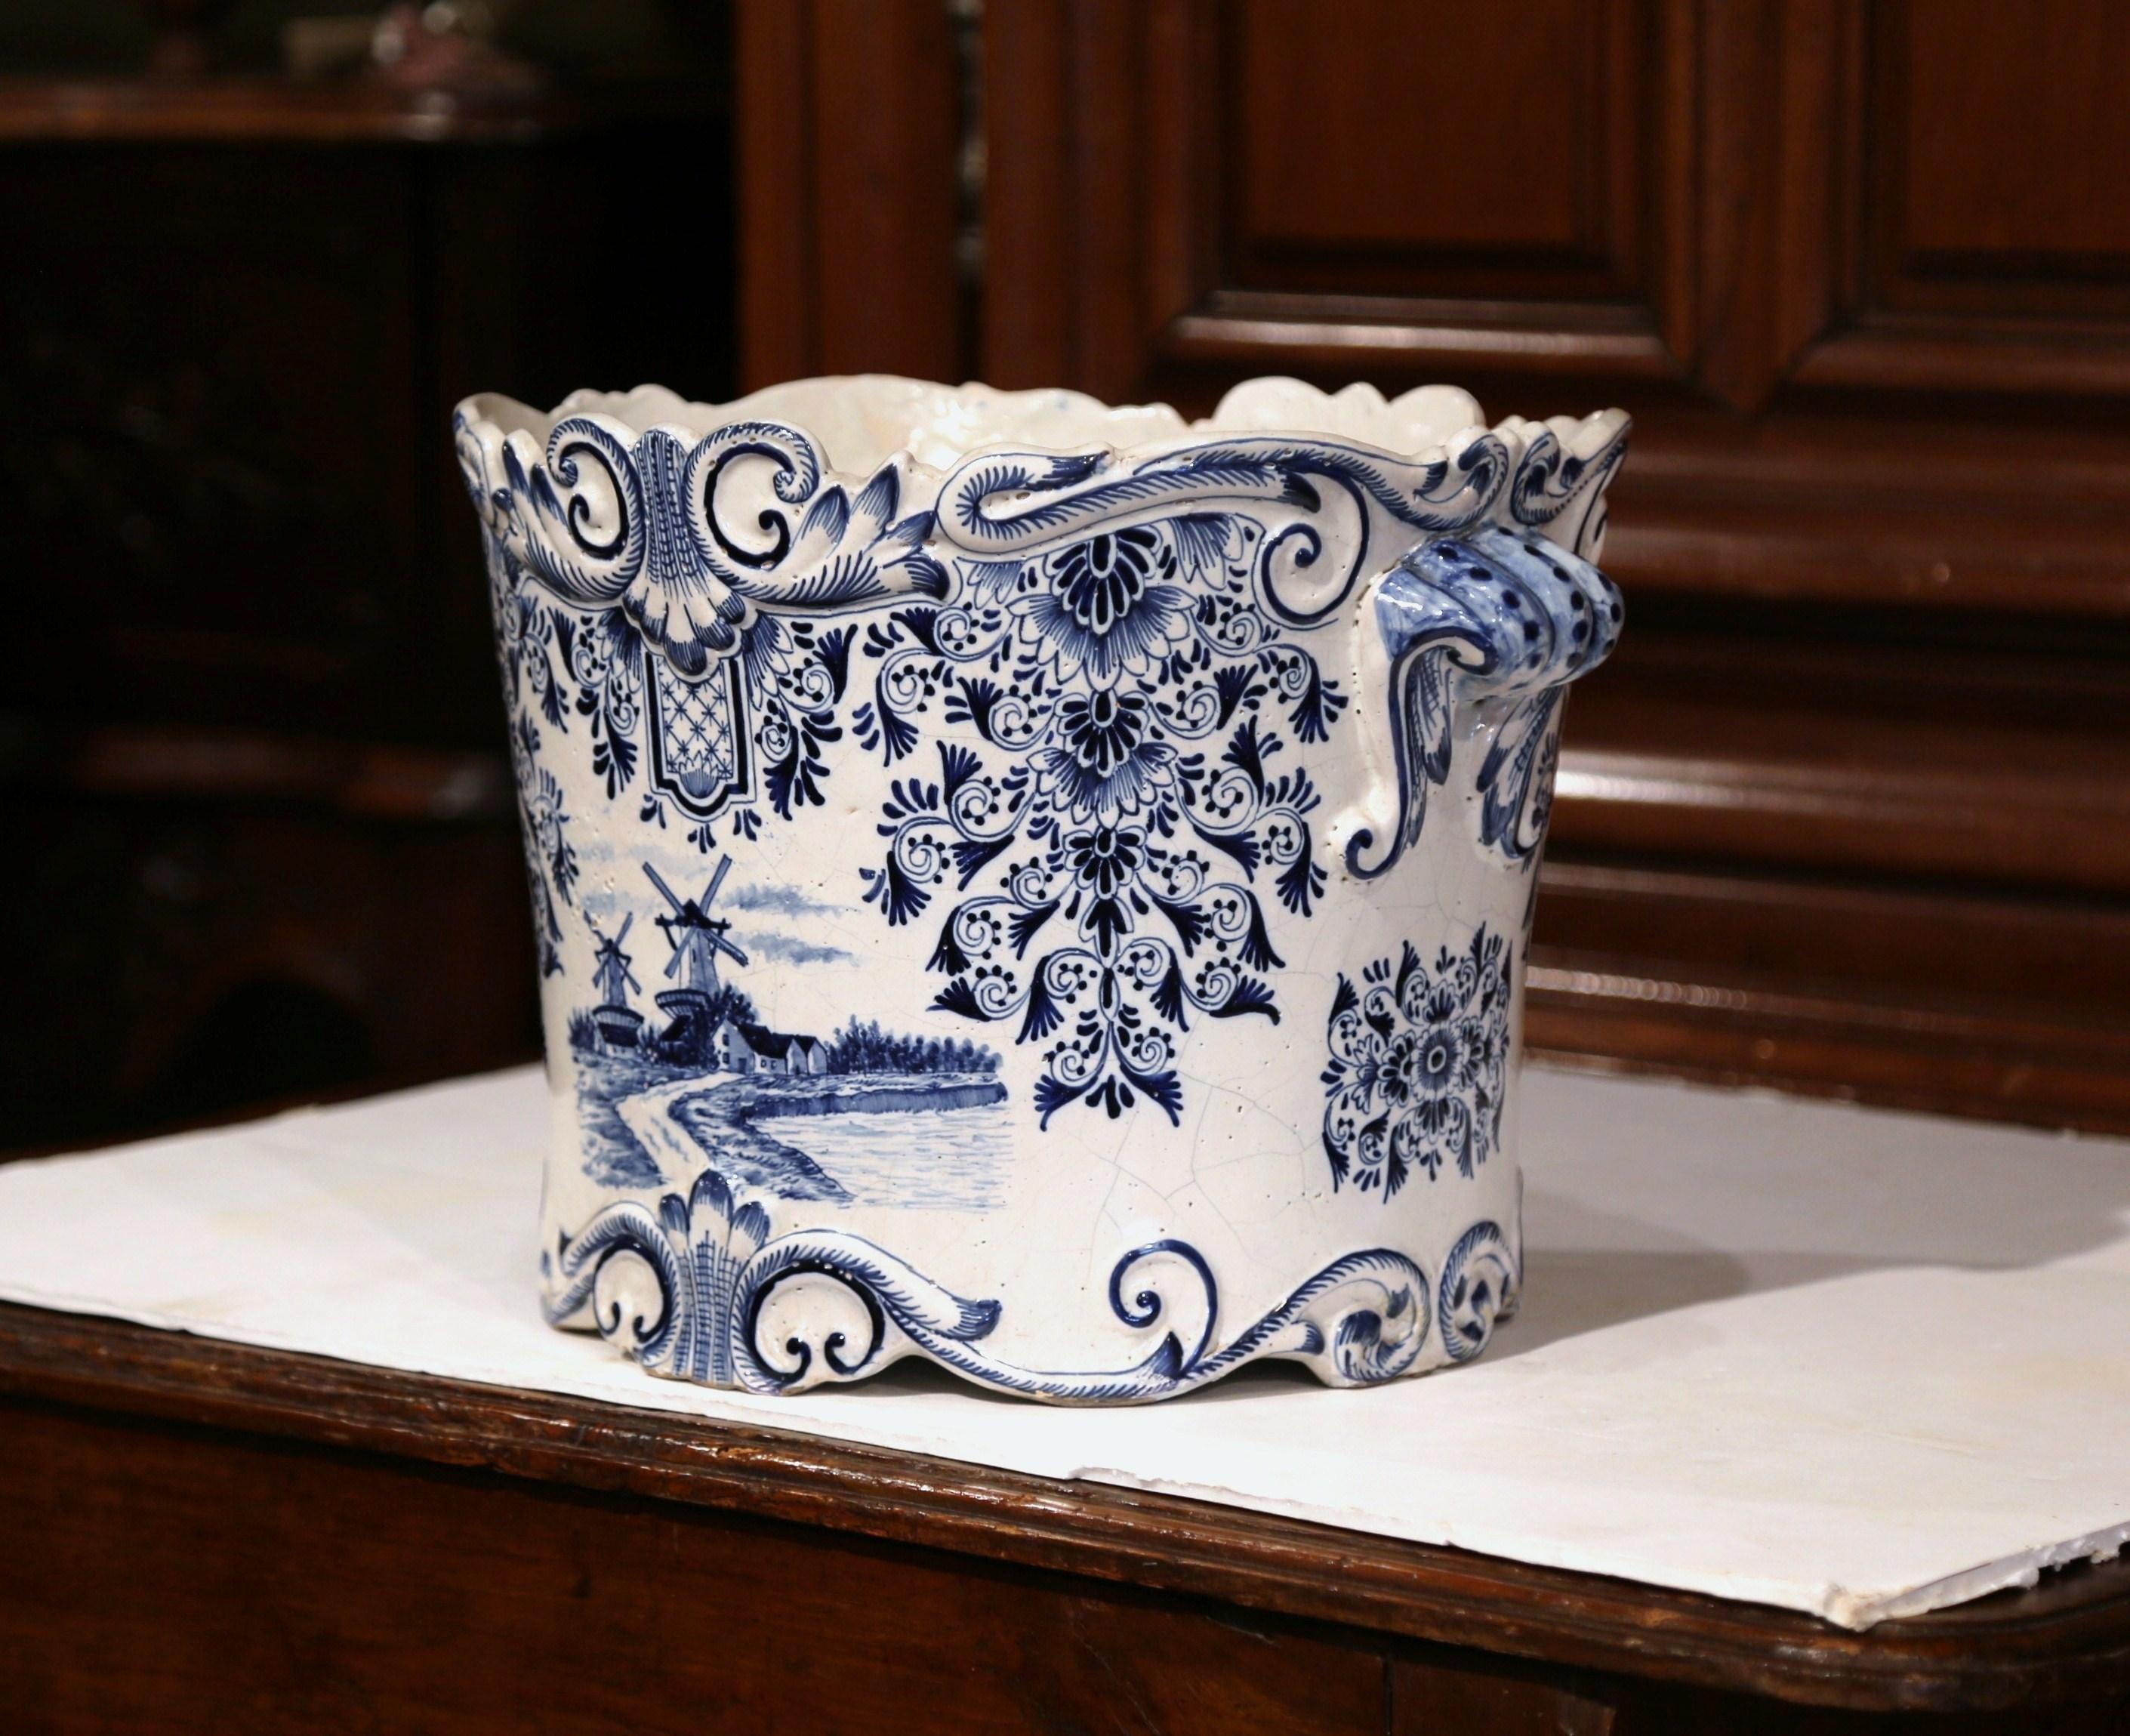 This large, antique faience planter was created in France, circa 1780. Round in shape, the blue and white cachepot is bevelled on the mouth, and is hand-painted on both sides. The motifs include carved shell handles on the sides, and traditional